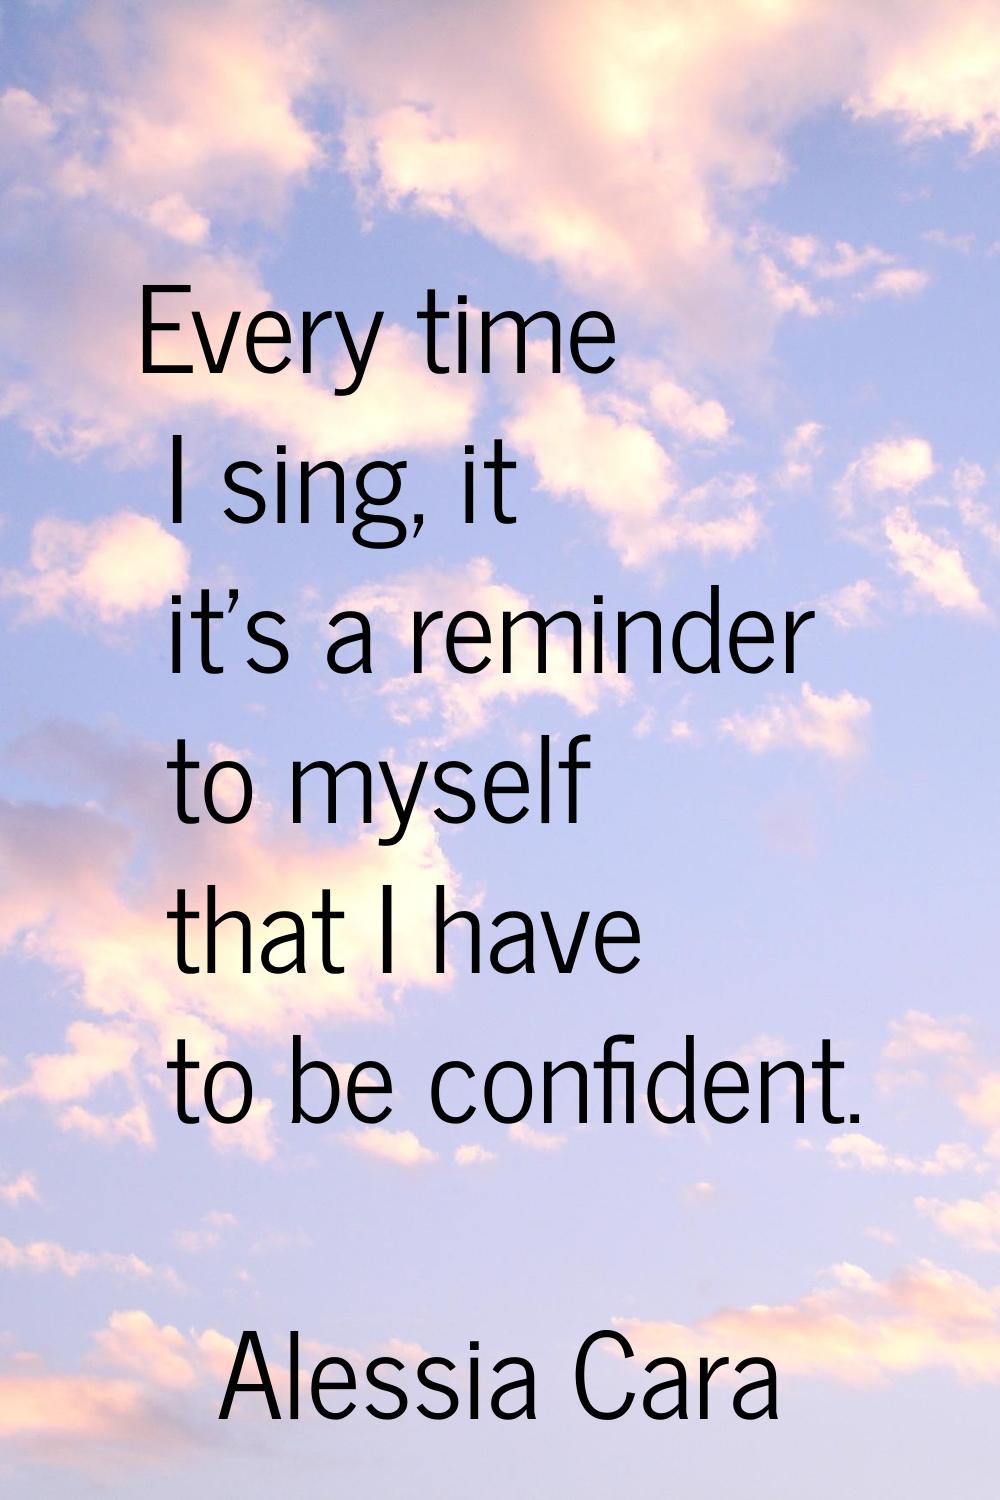 Every time I sing, it it's a reminder to myself that I have to be confident.